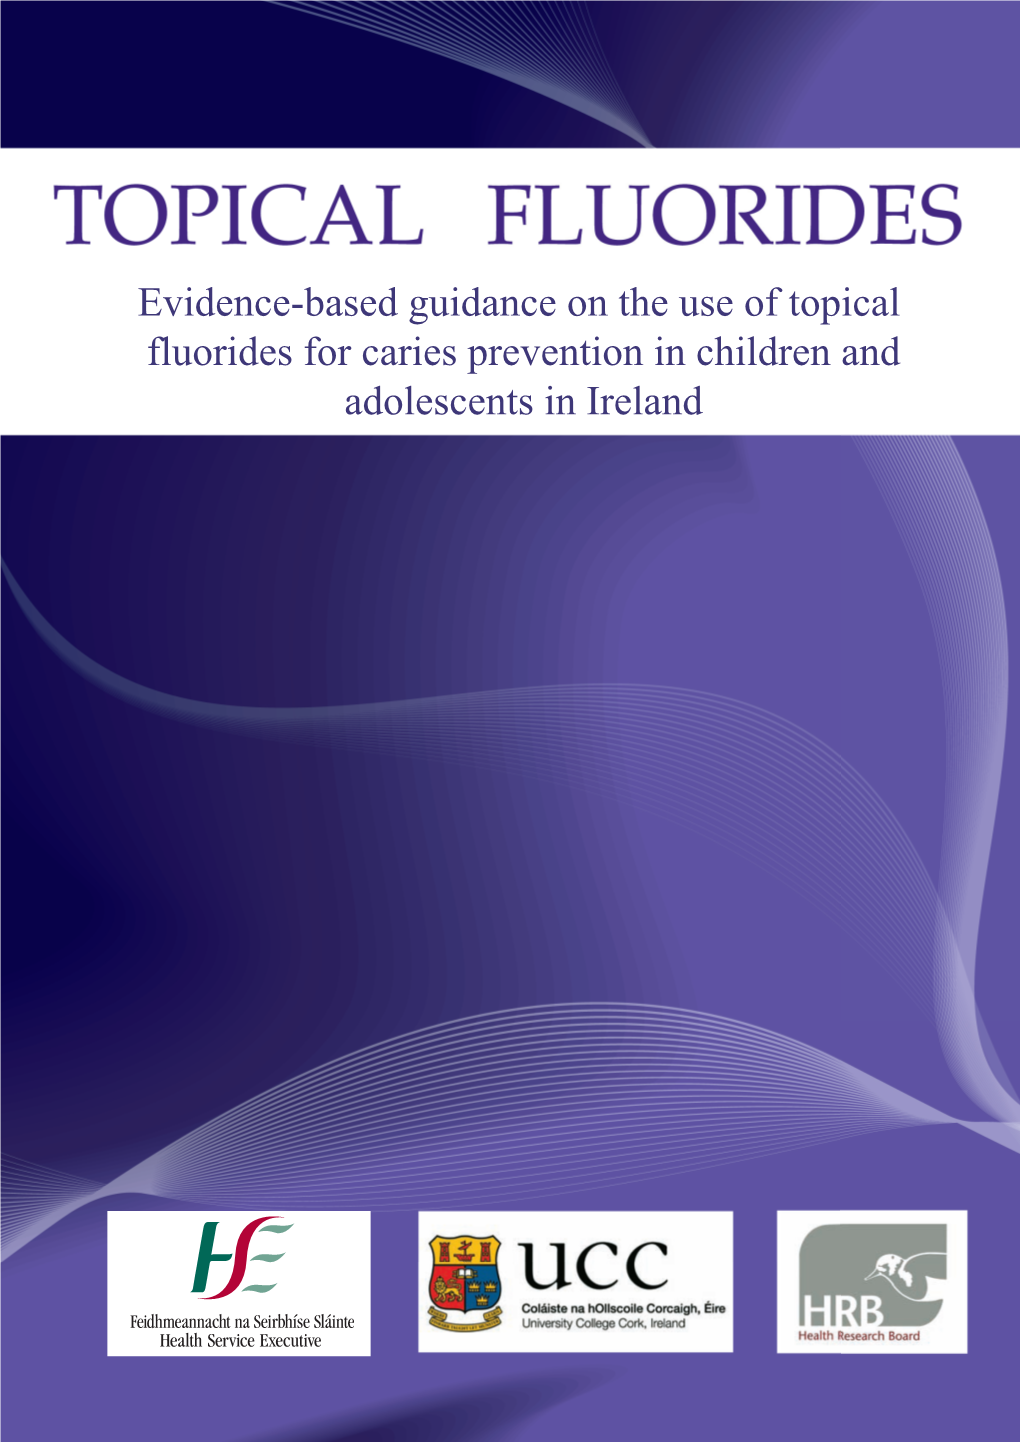 Evidence-Based Guidance on the Use of Topical Fluorides for Caries Prevention in Children and Adolescents in Ireland